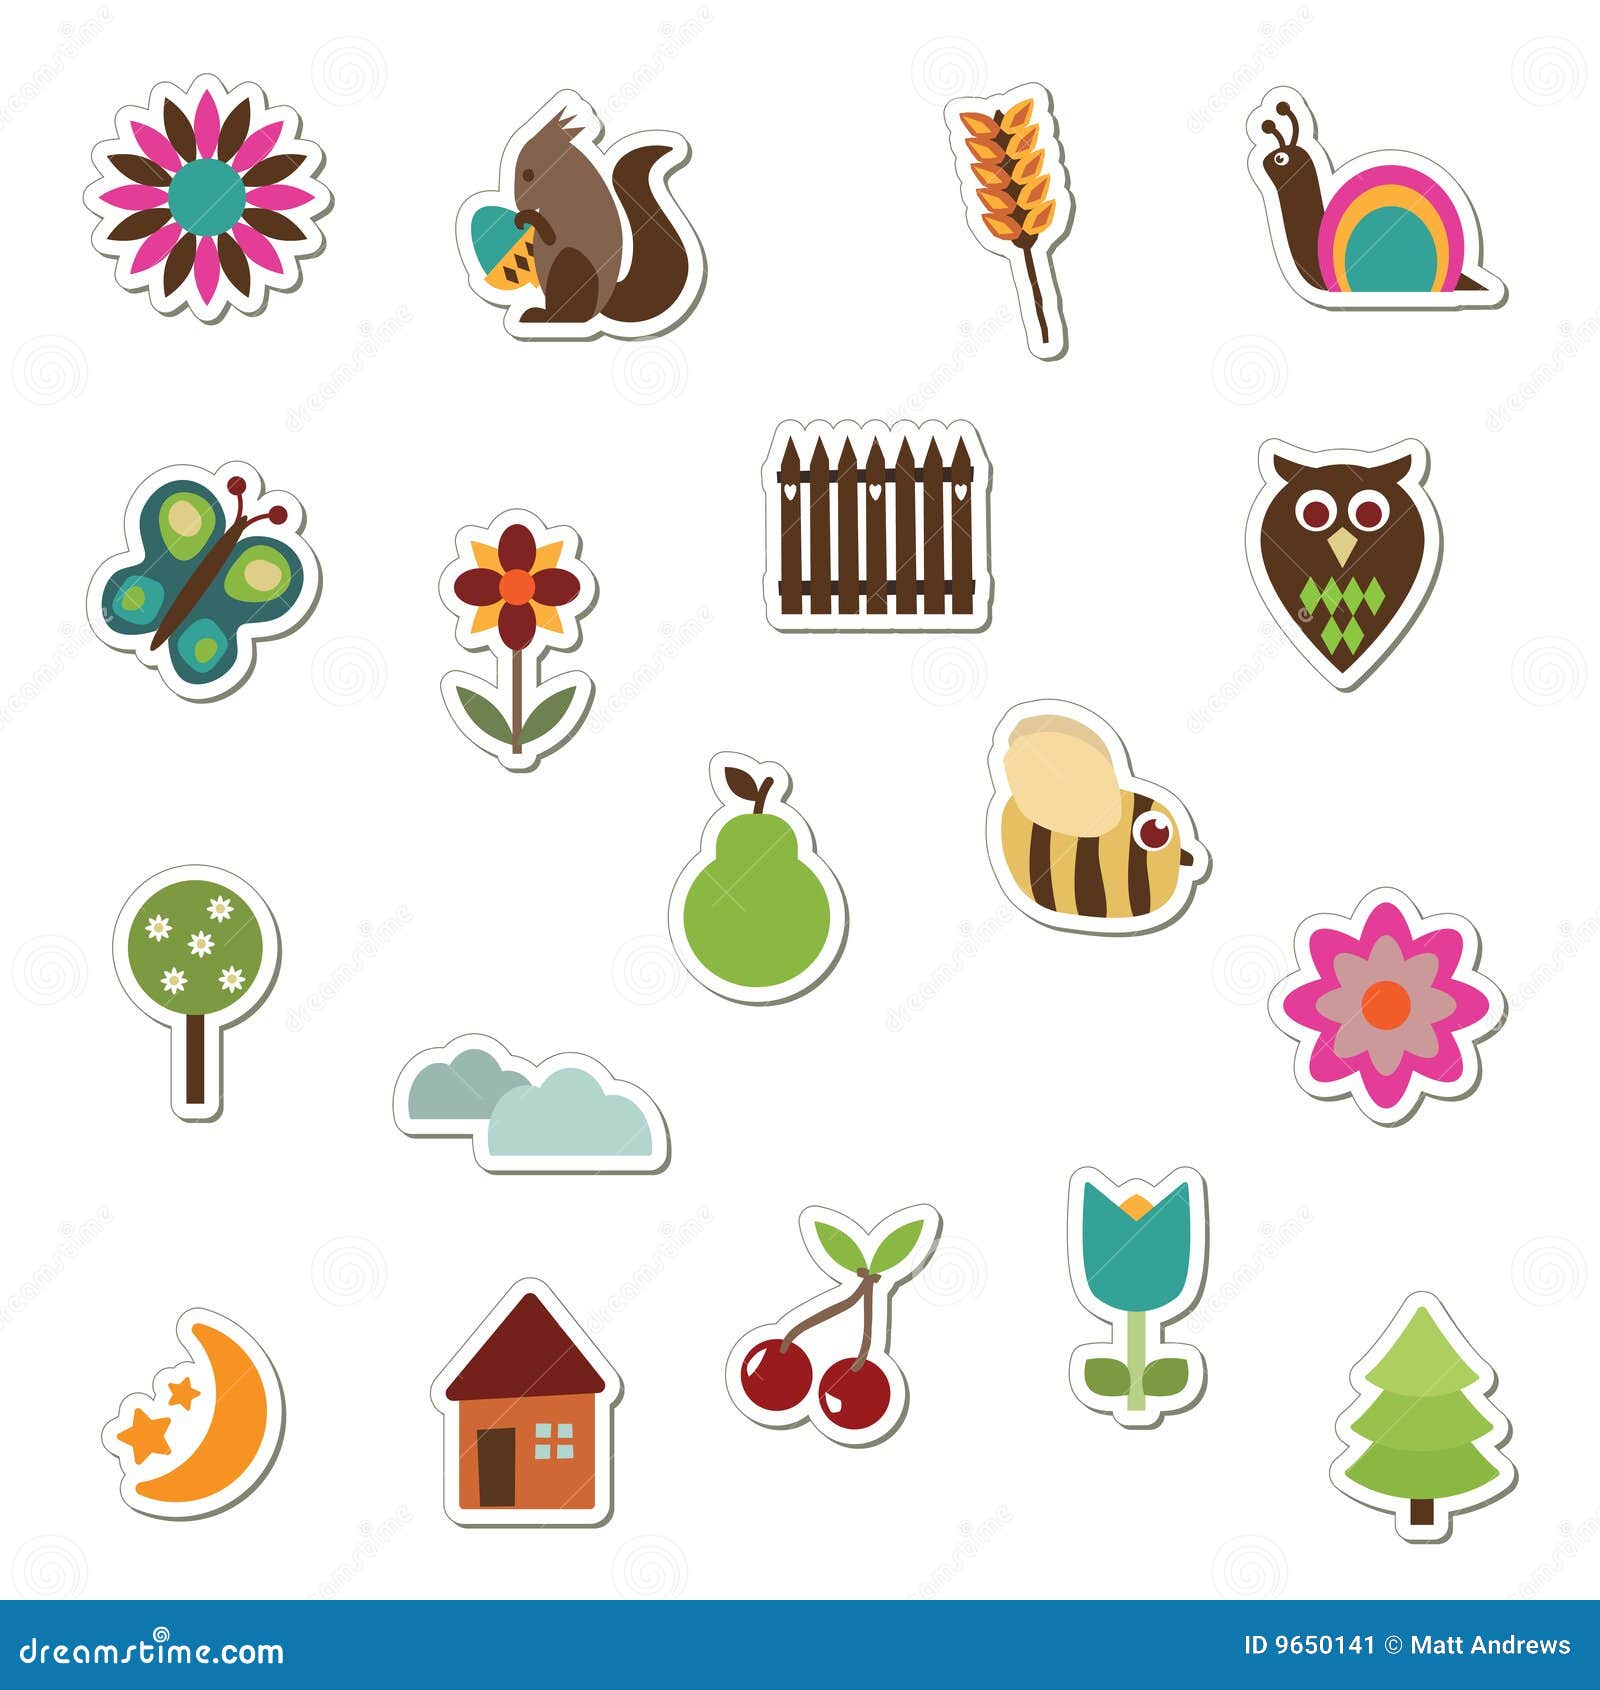 Forest stickers Royalty Free Vector Image - VectorStock